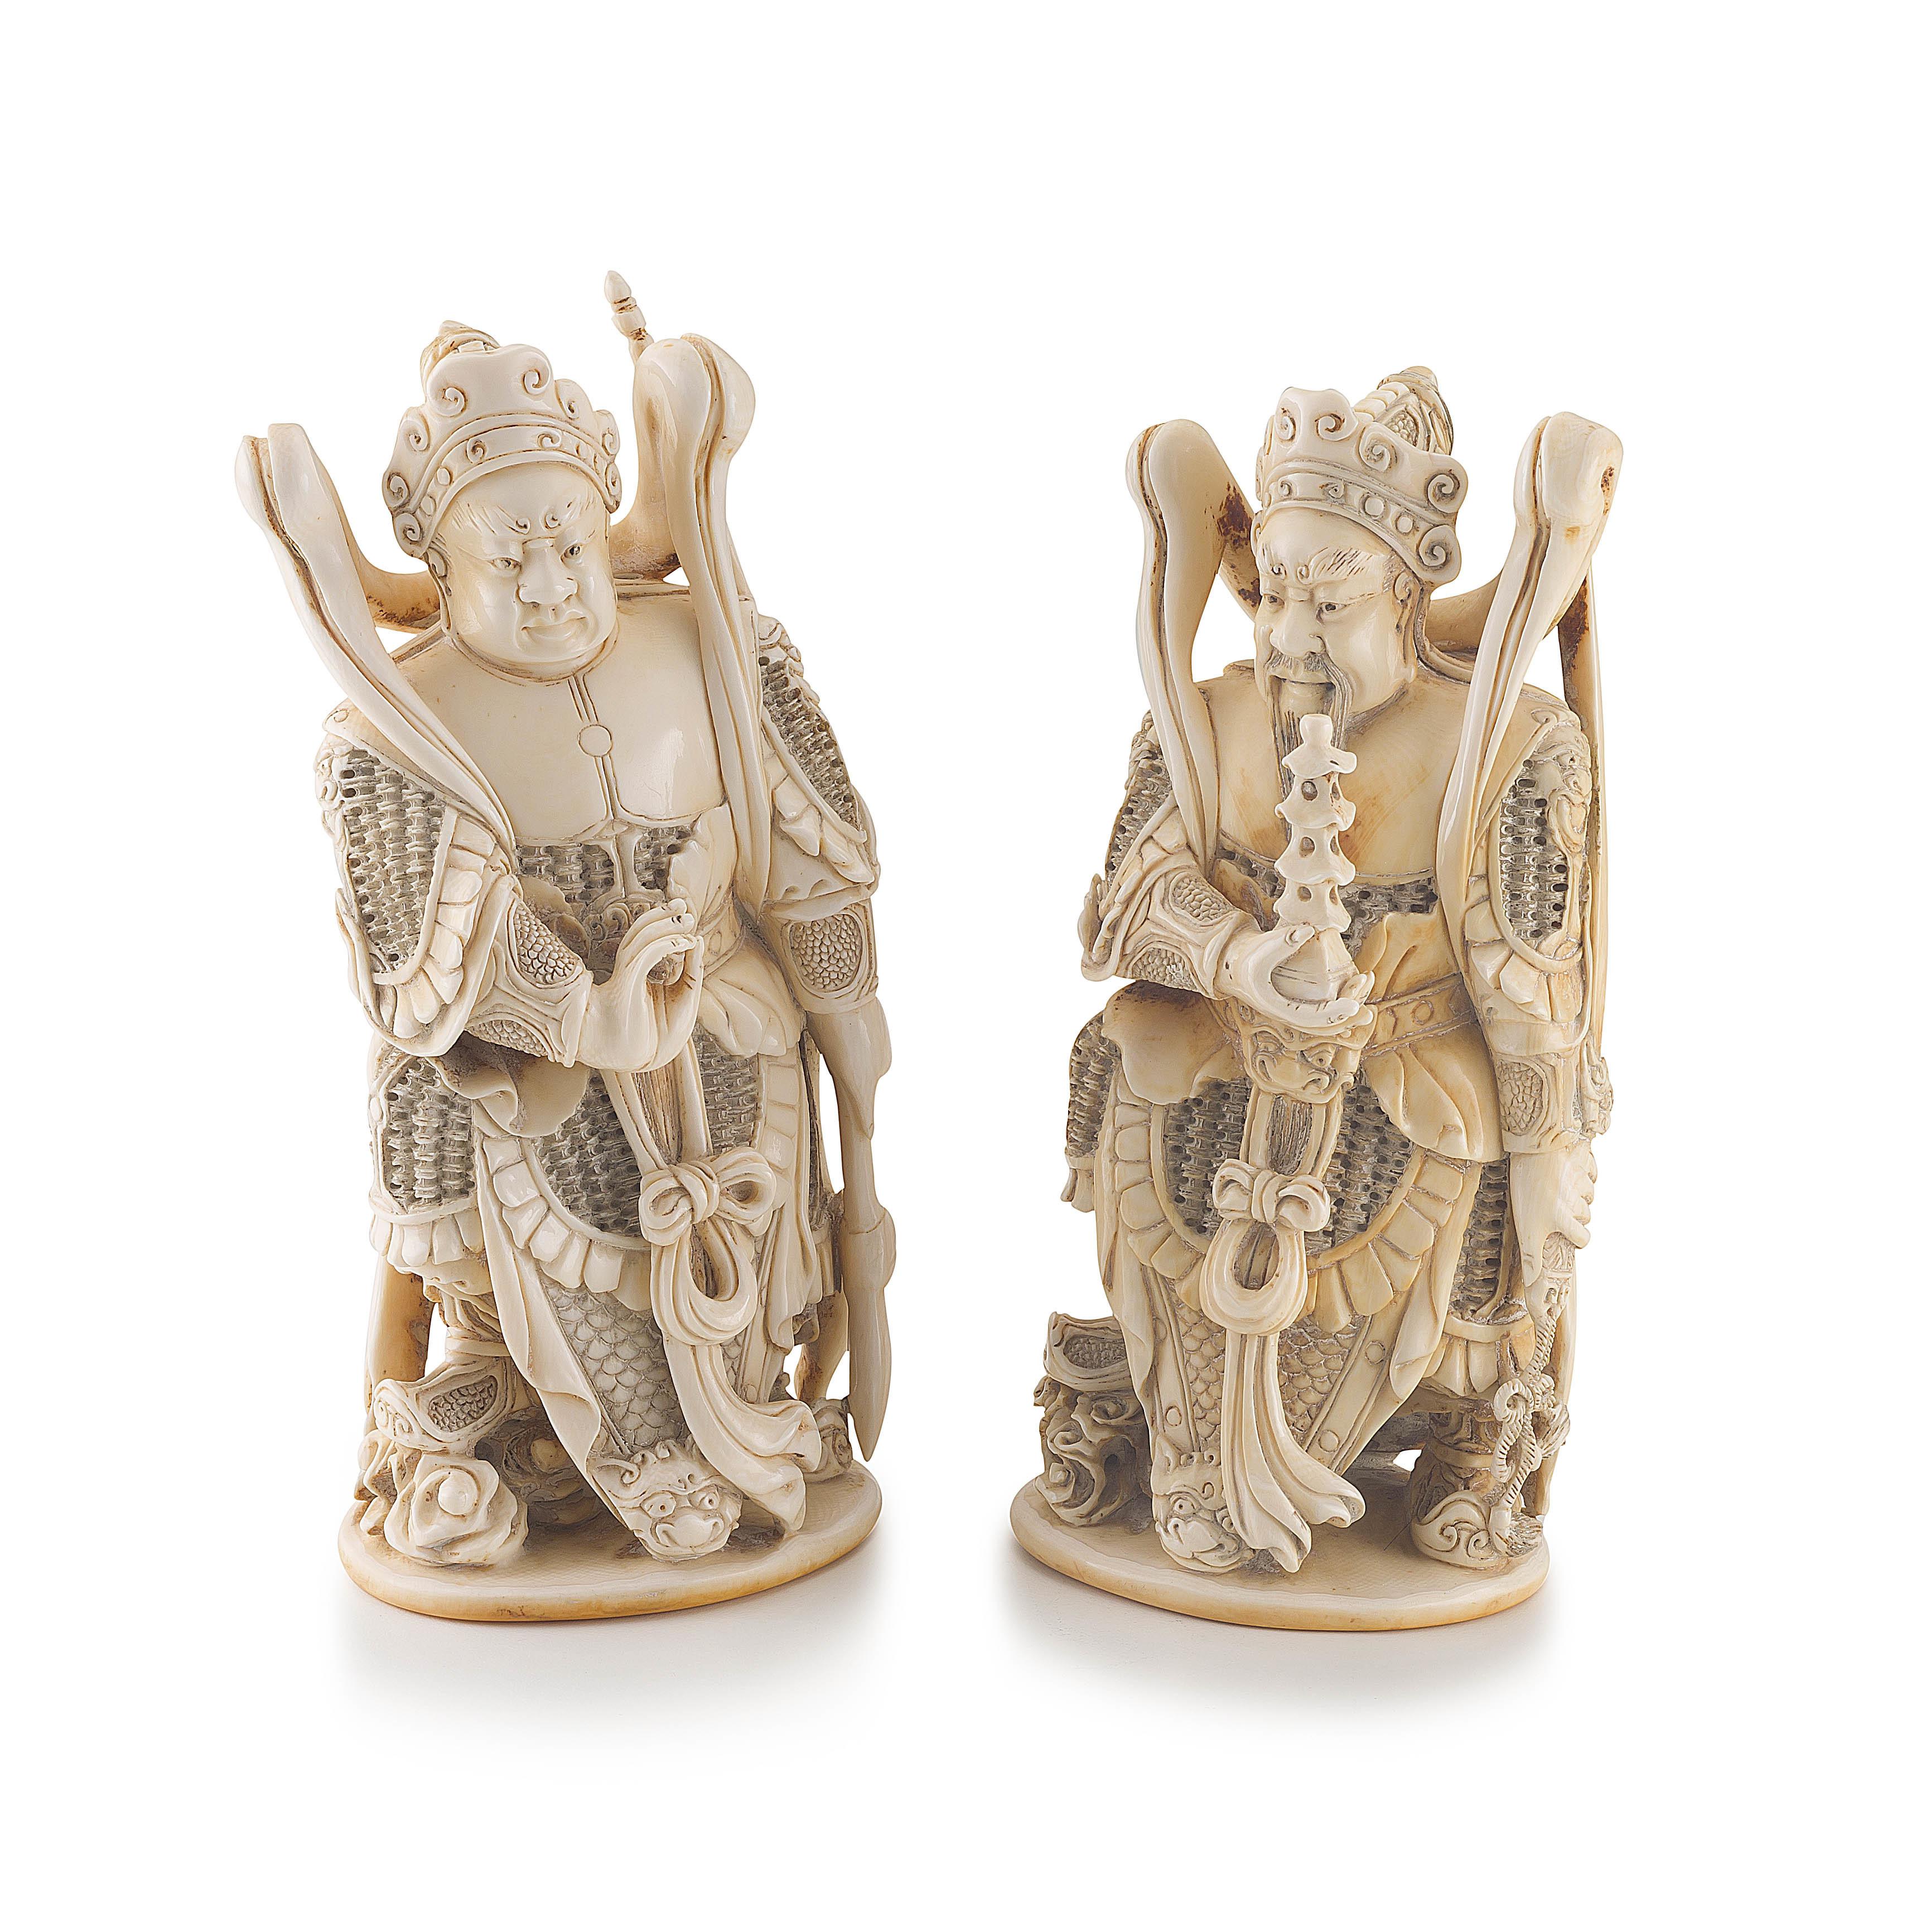 A pair of Chinese carved ivory figures of warriors, Qing Dynasty, 19th century